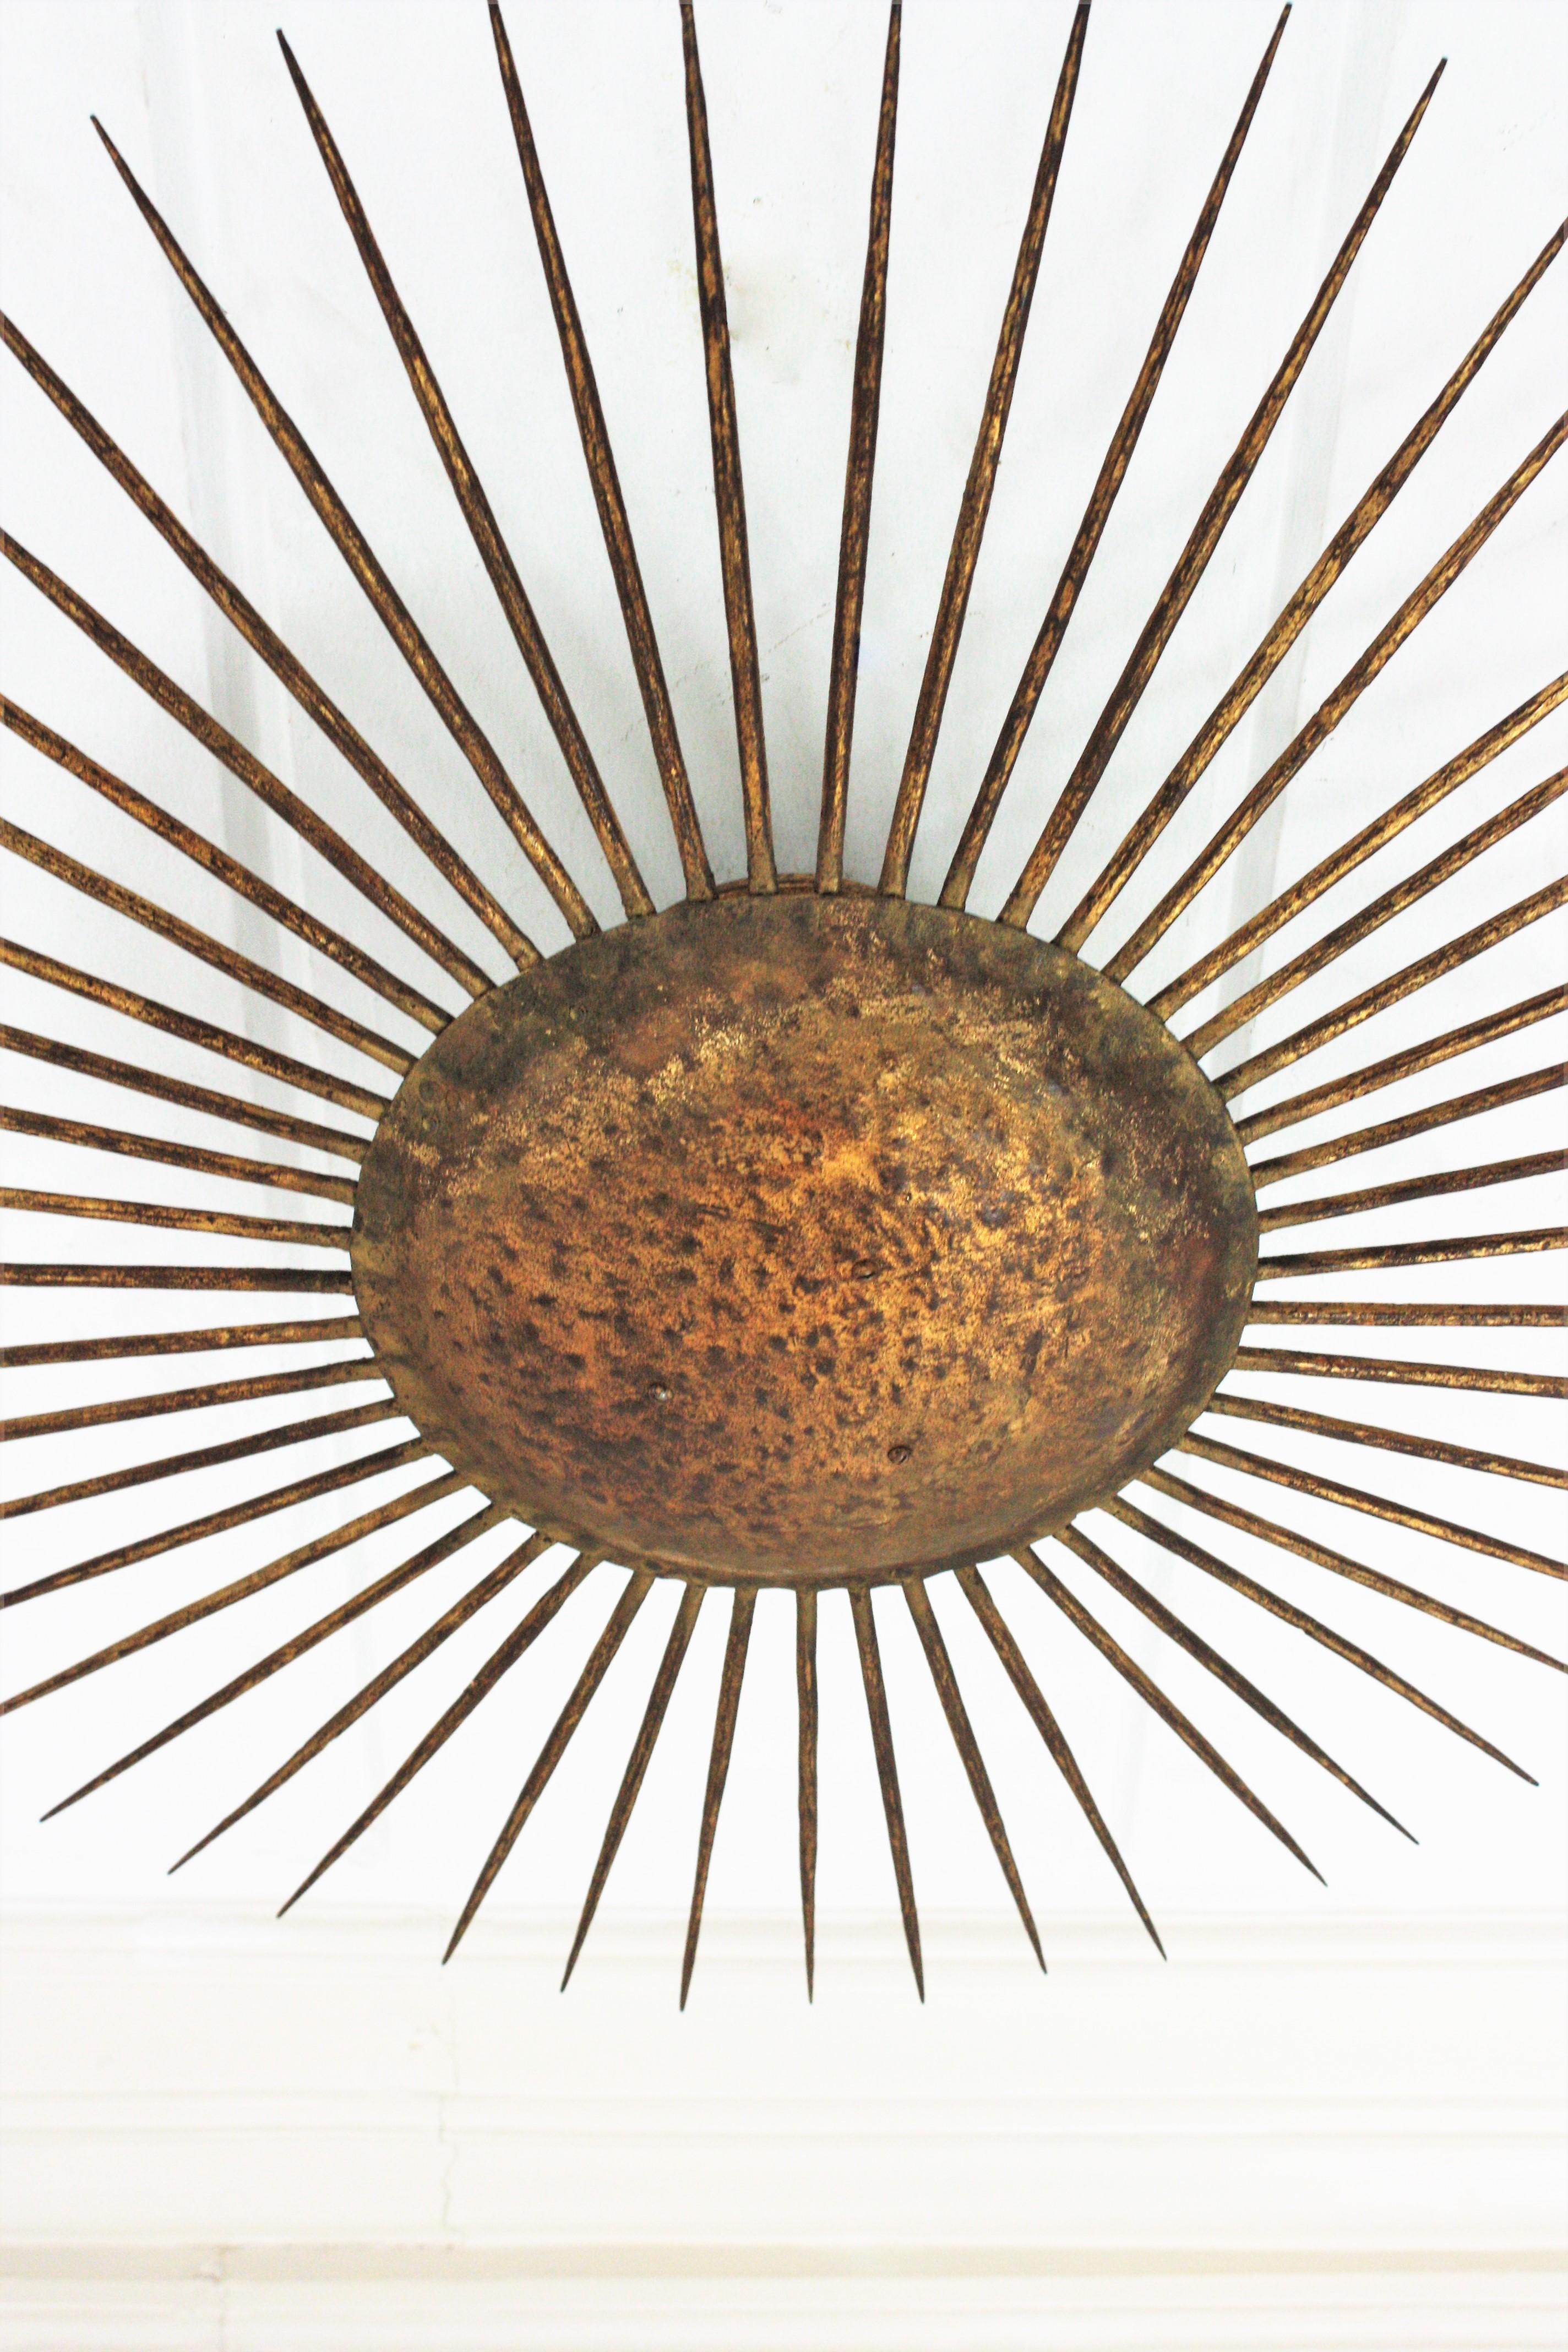 French Sunburst Ceiling Light Fixture in Gilt Wrought Iron, 1940s For Sale 4